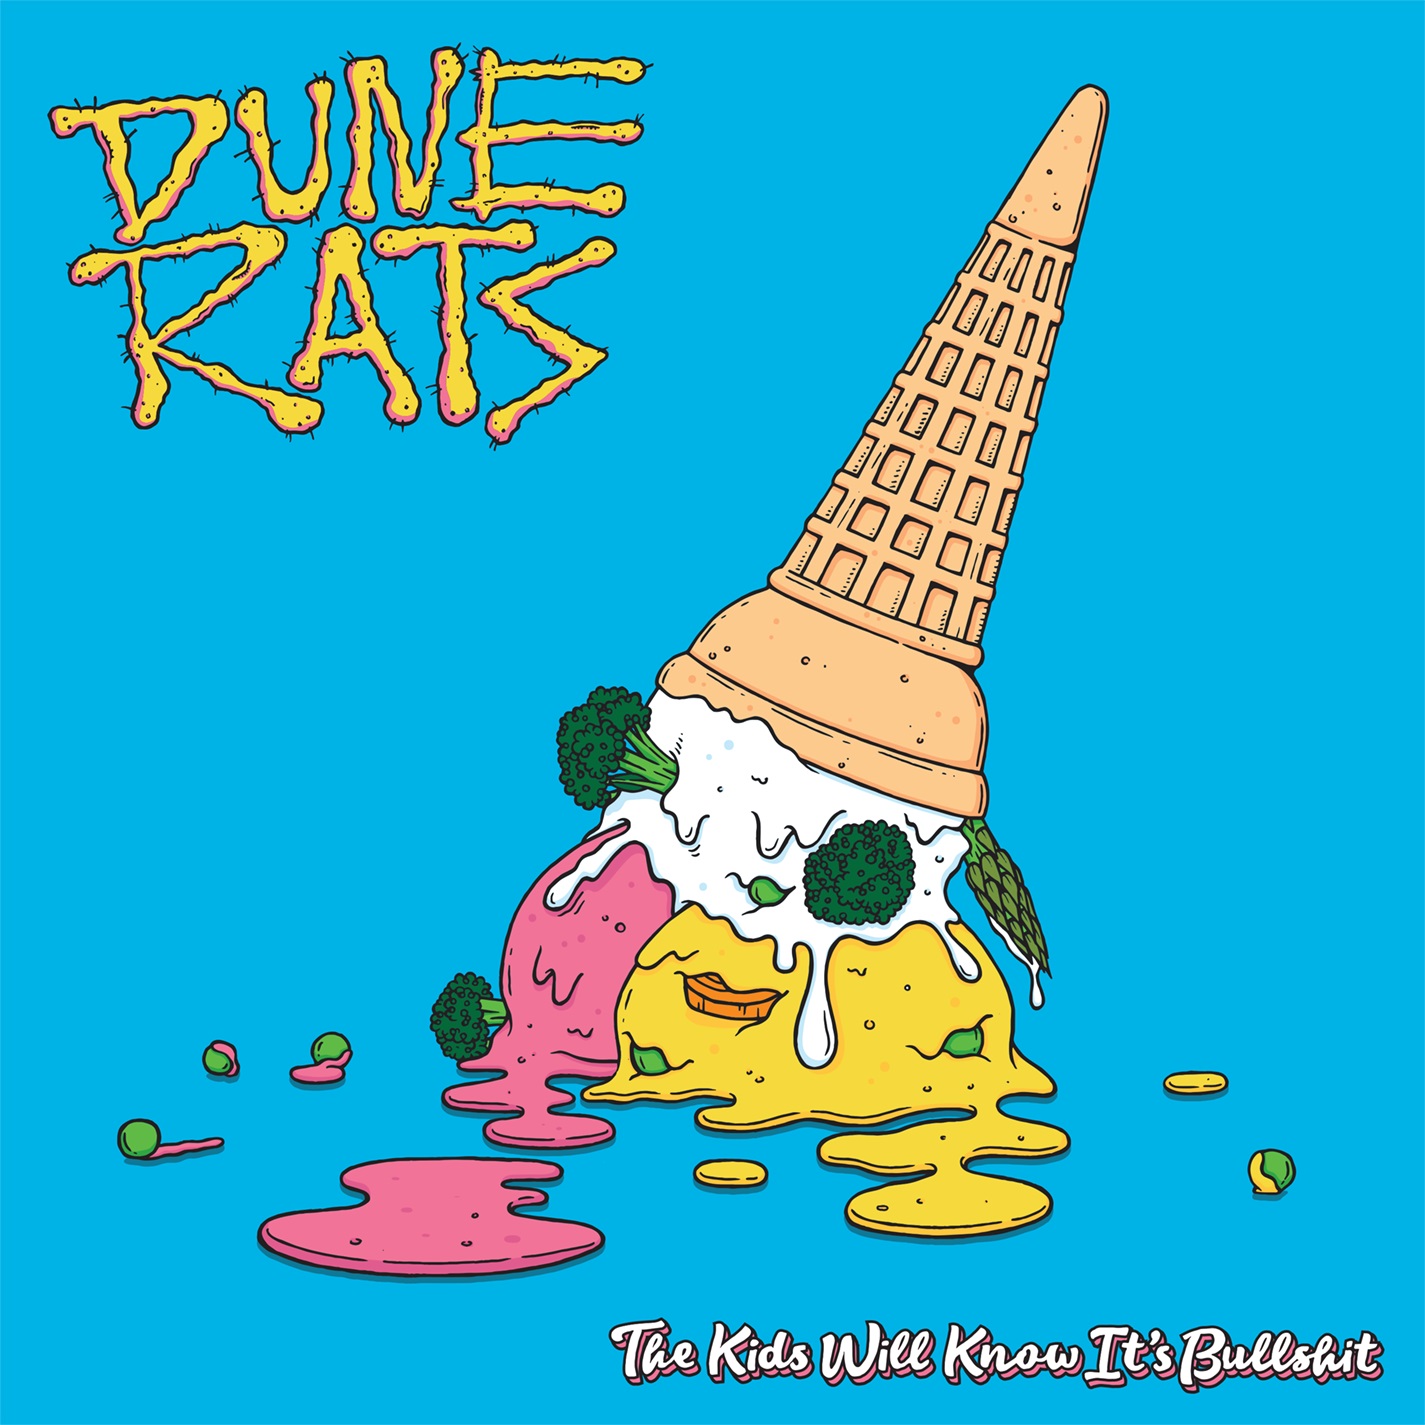 The Kids Will Know Dune Rats